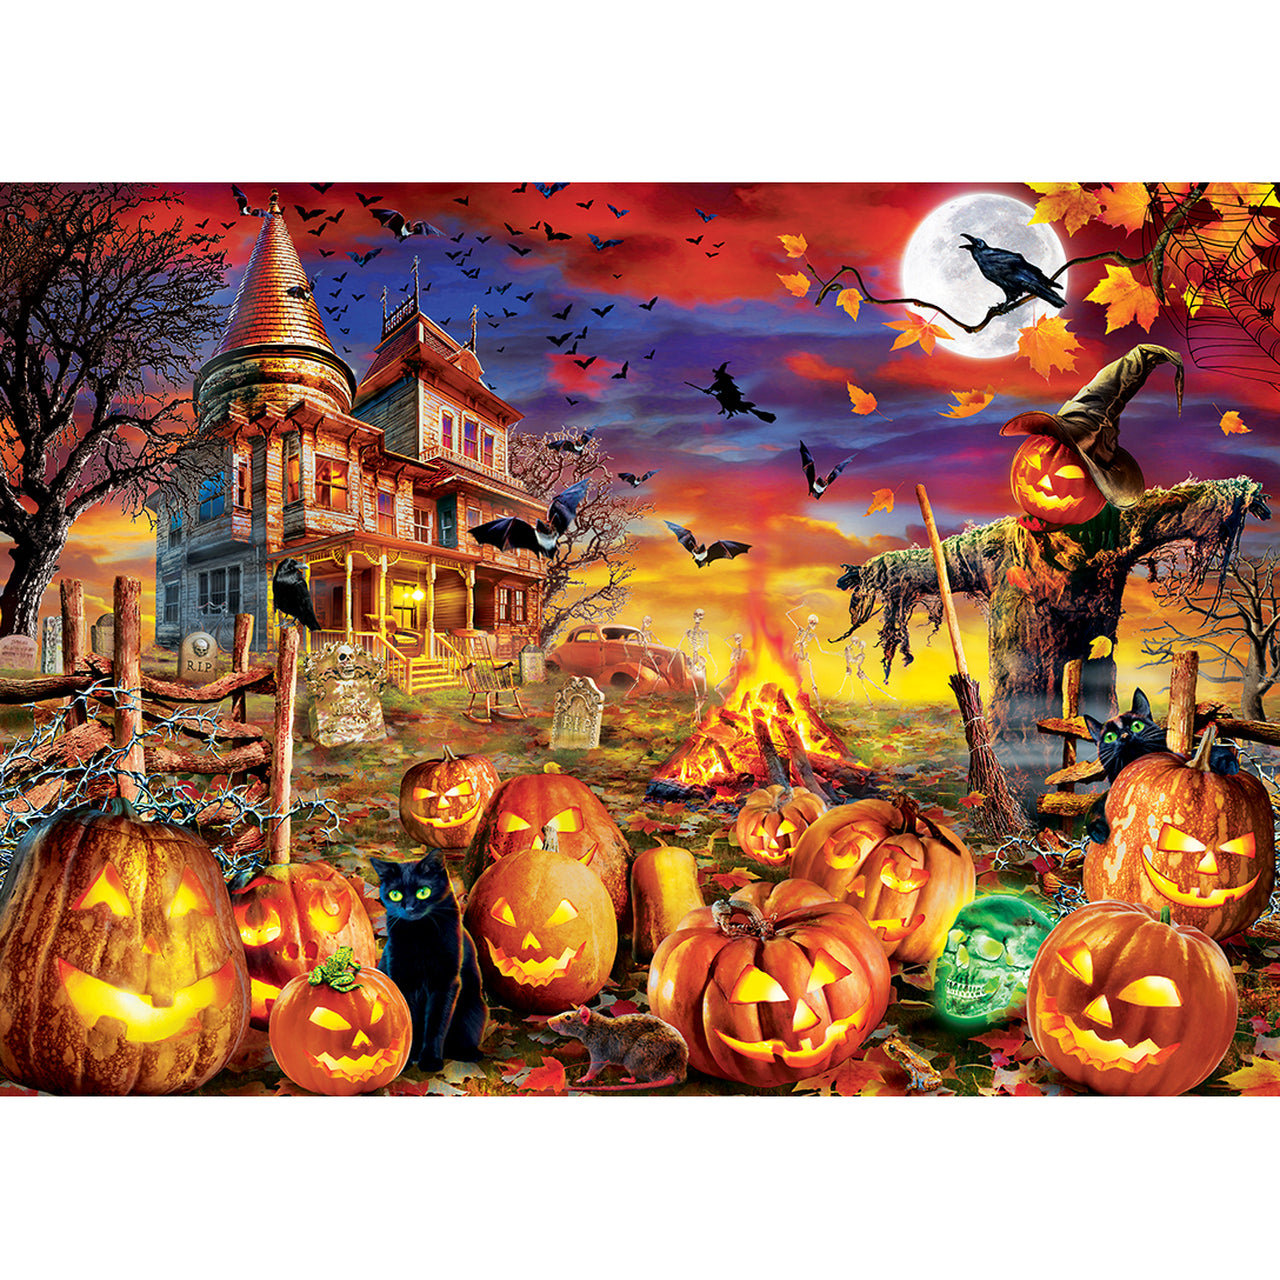 Halloween Glow in the Dark -All Hallow's Eve 500 Piece Jigsaw Puzzle by MasterPieces